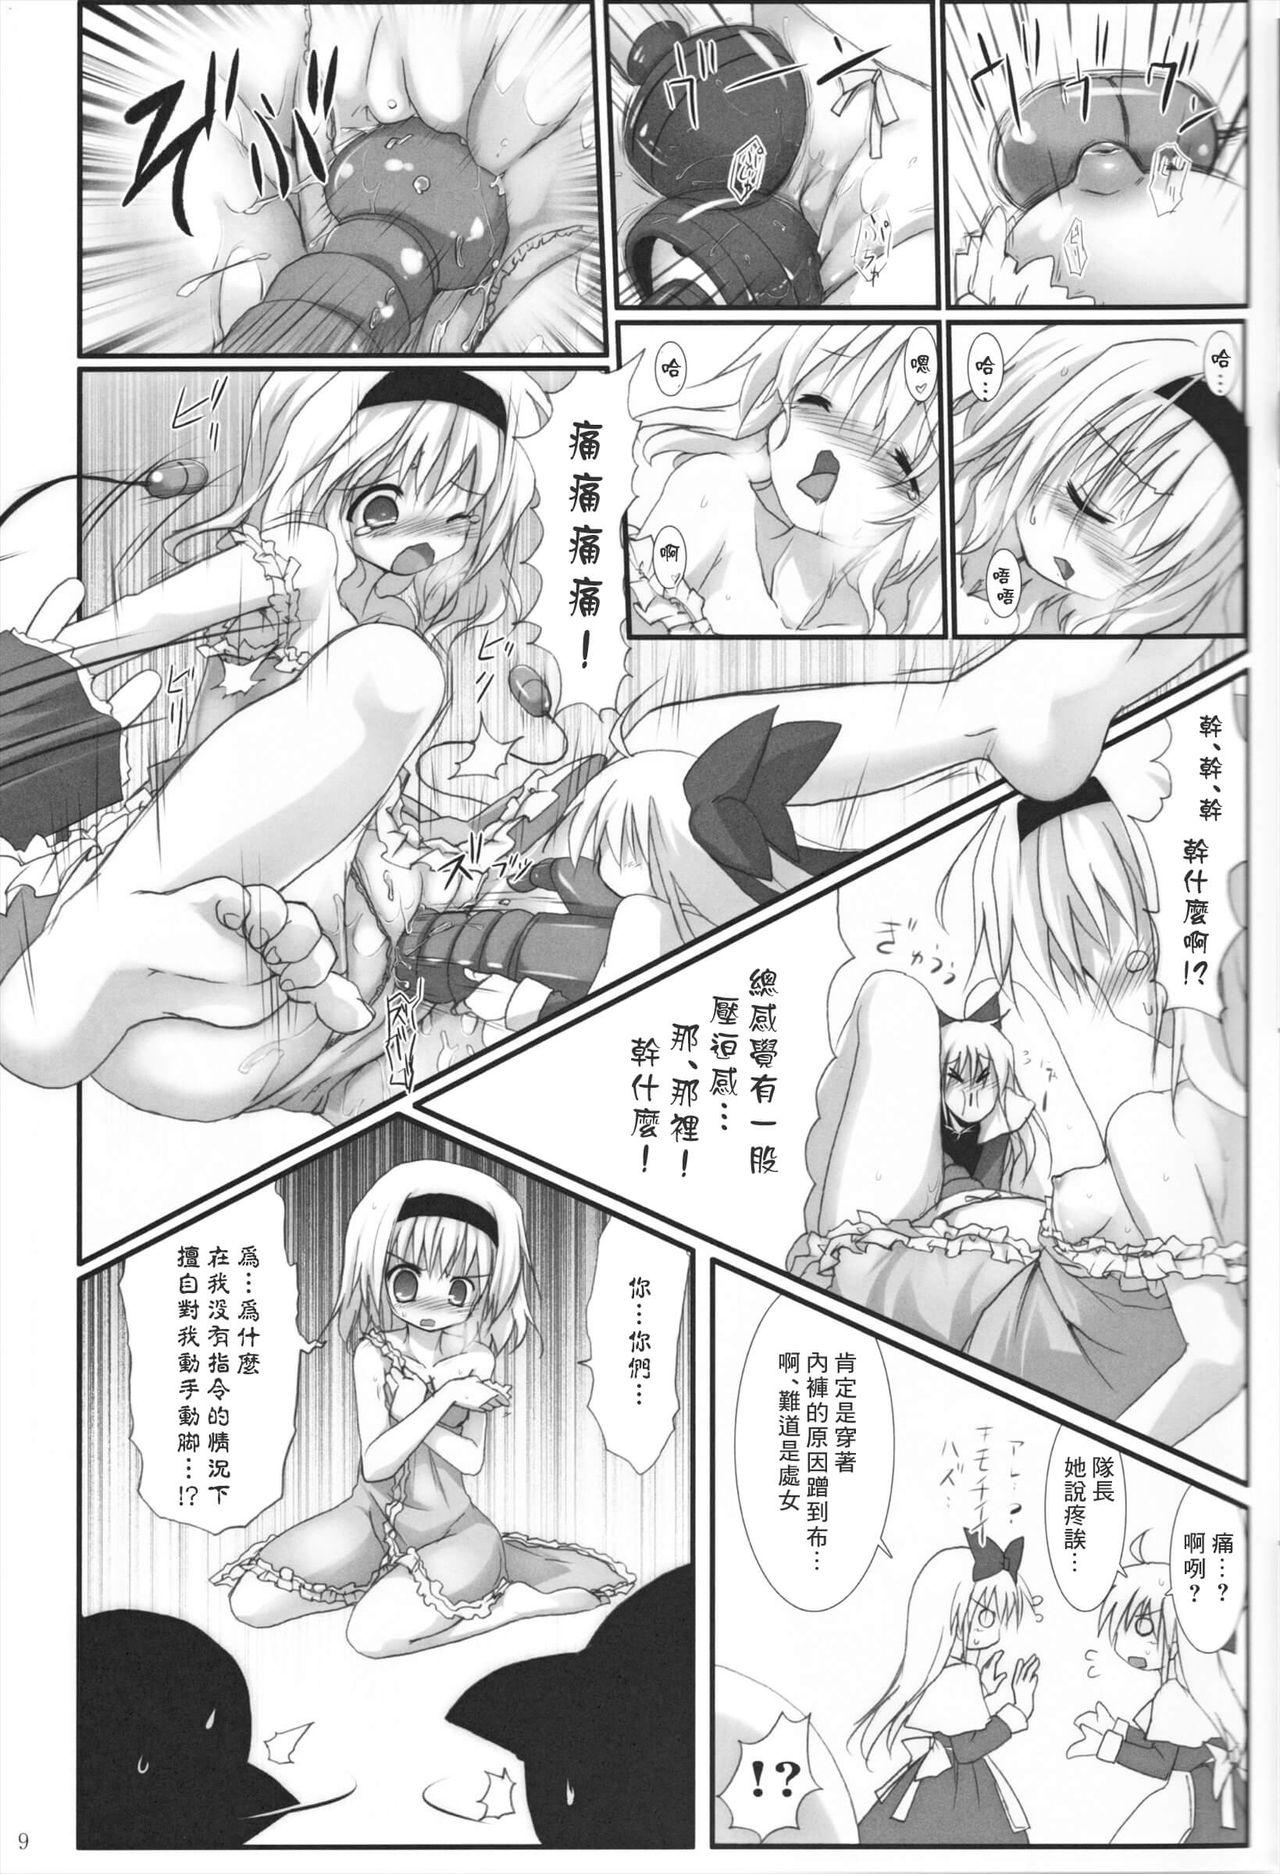 Humiliation Alice in Nightmare - Touhou project Hardcore Sex - Page 10